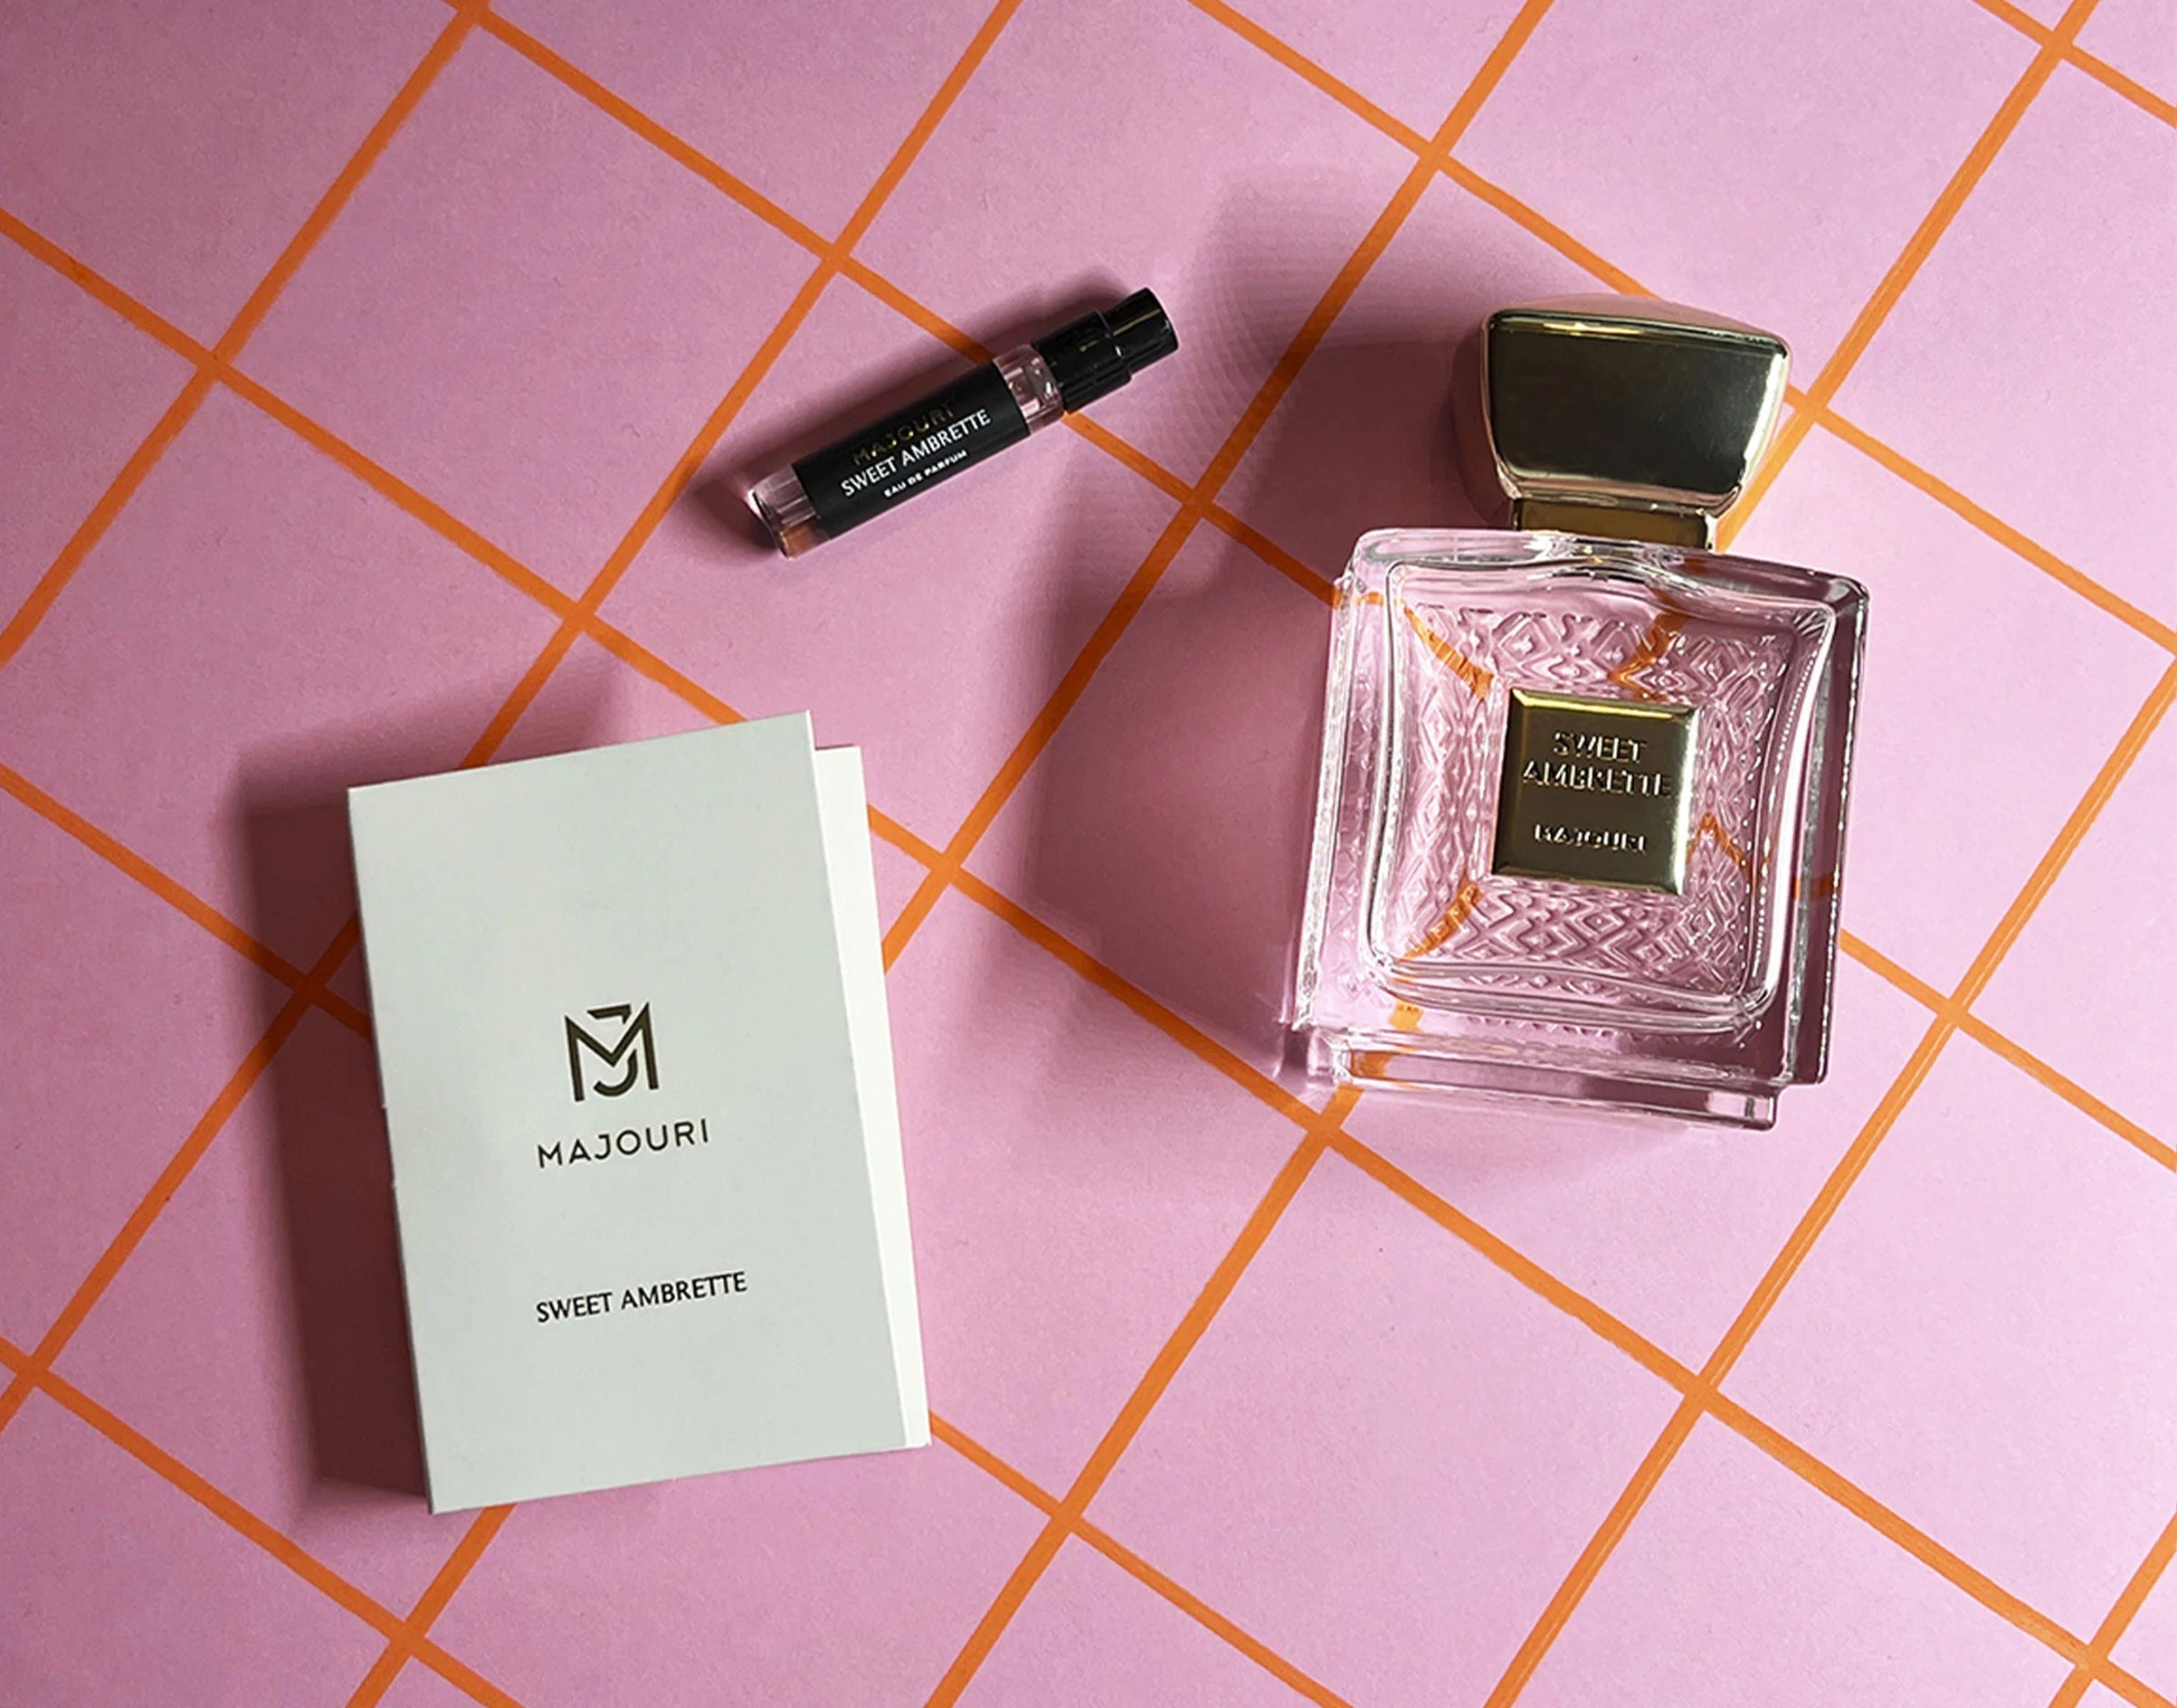 TIMELESS FRAGRANCES YOU NEED TO TRY - The Pink and Petite